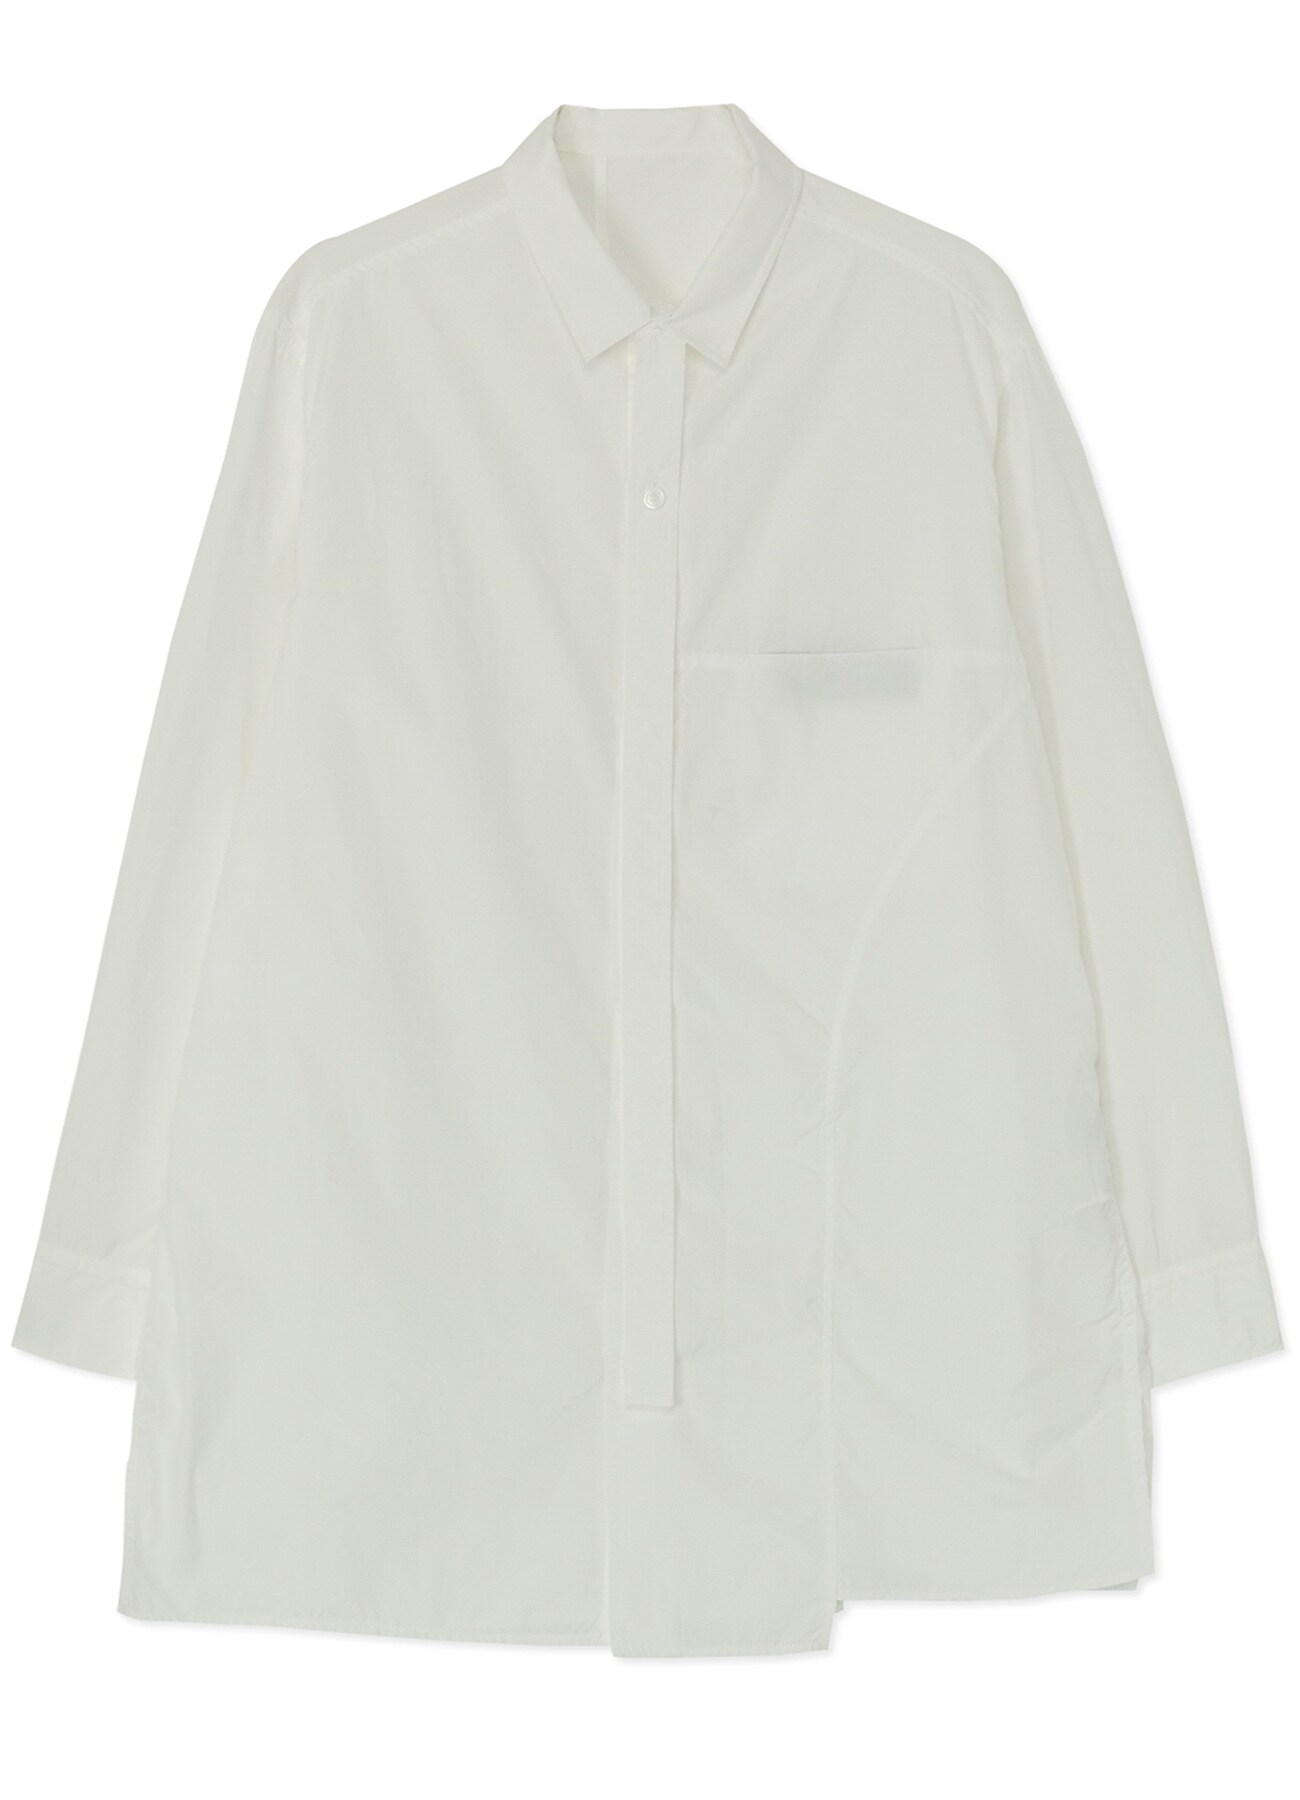 COTTON BROADCLOTH SHIRT WITH UNEVEN HEMLINE